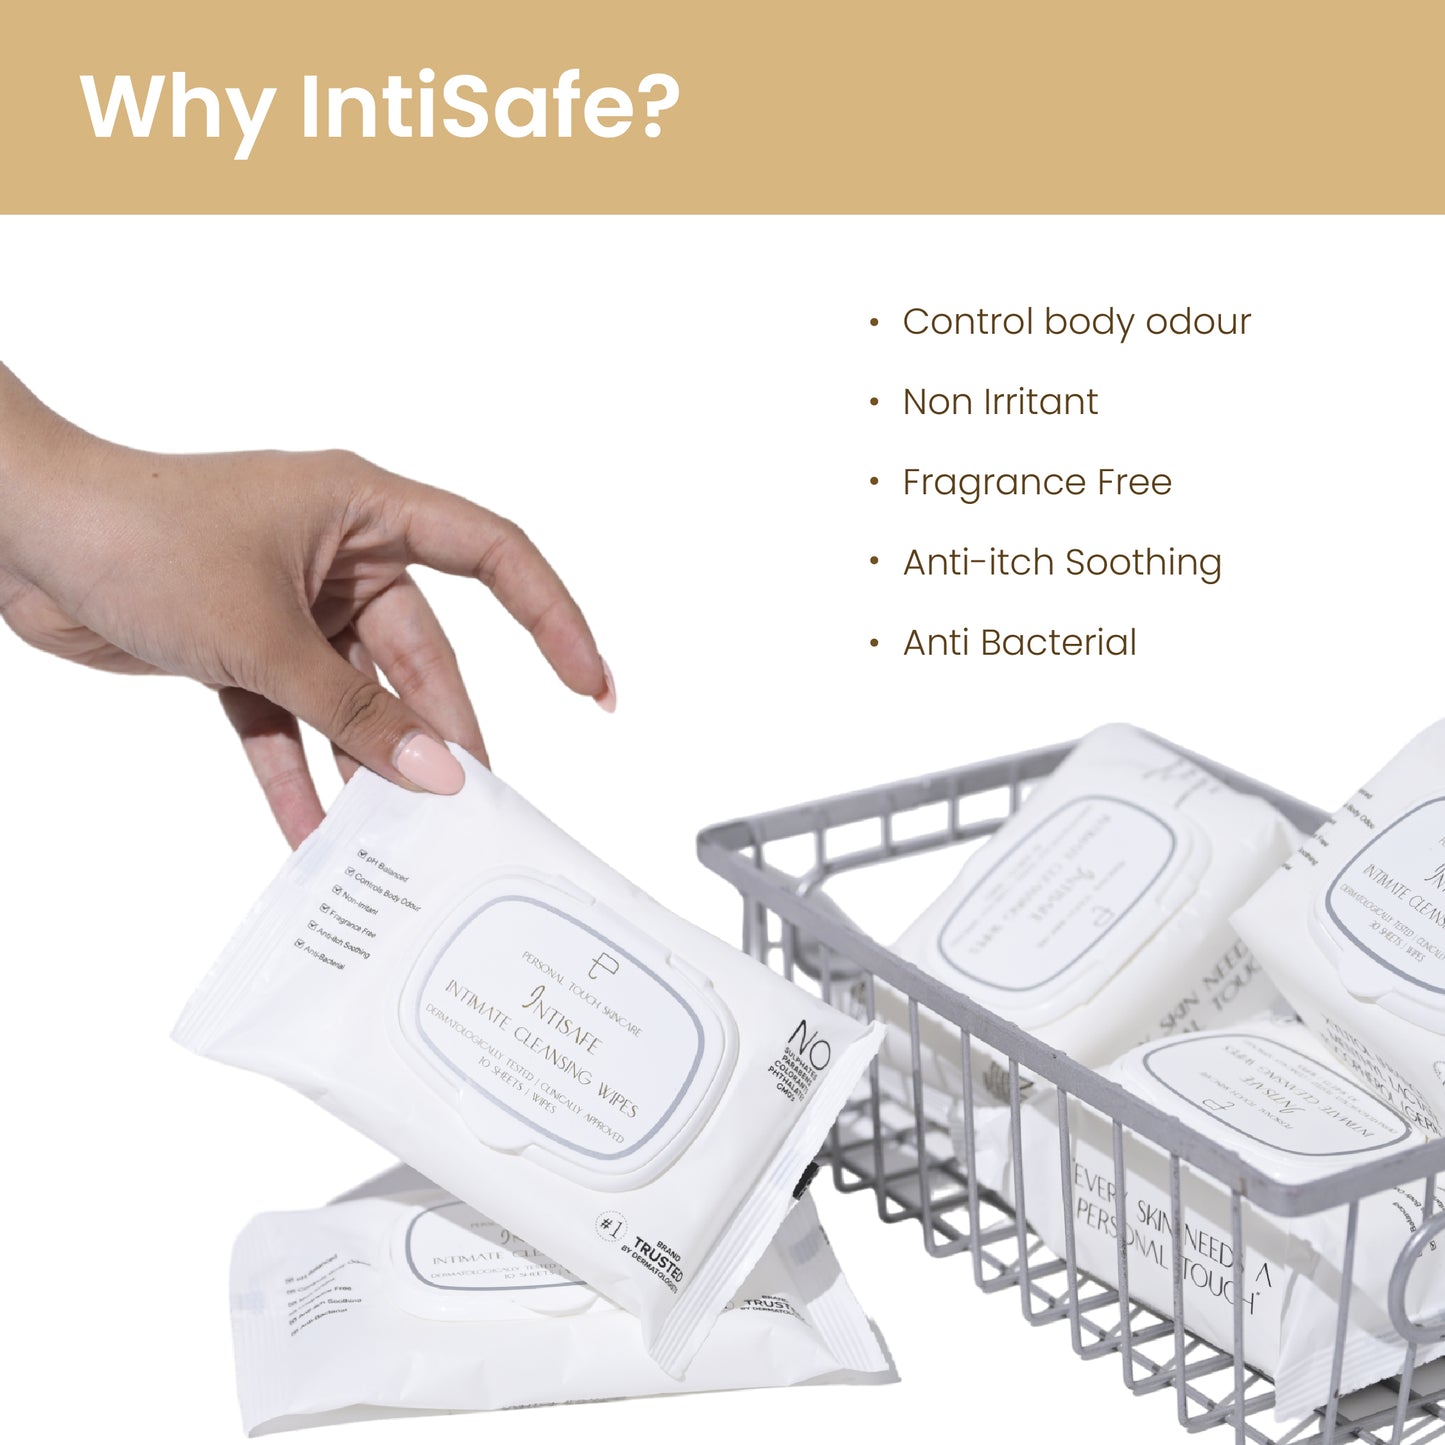 Intimate Cleansing Wipes - Women's & Men Hygiene Wipes for Sensitive Skin - INTISAFE